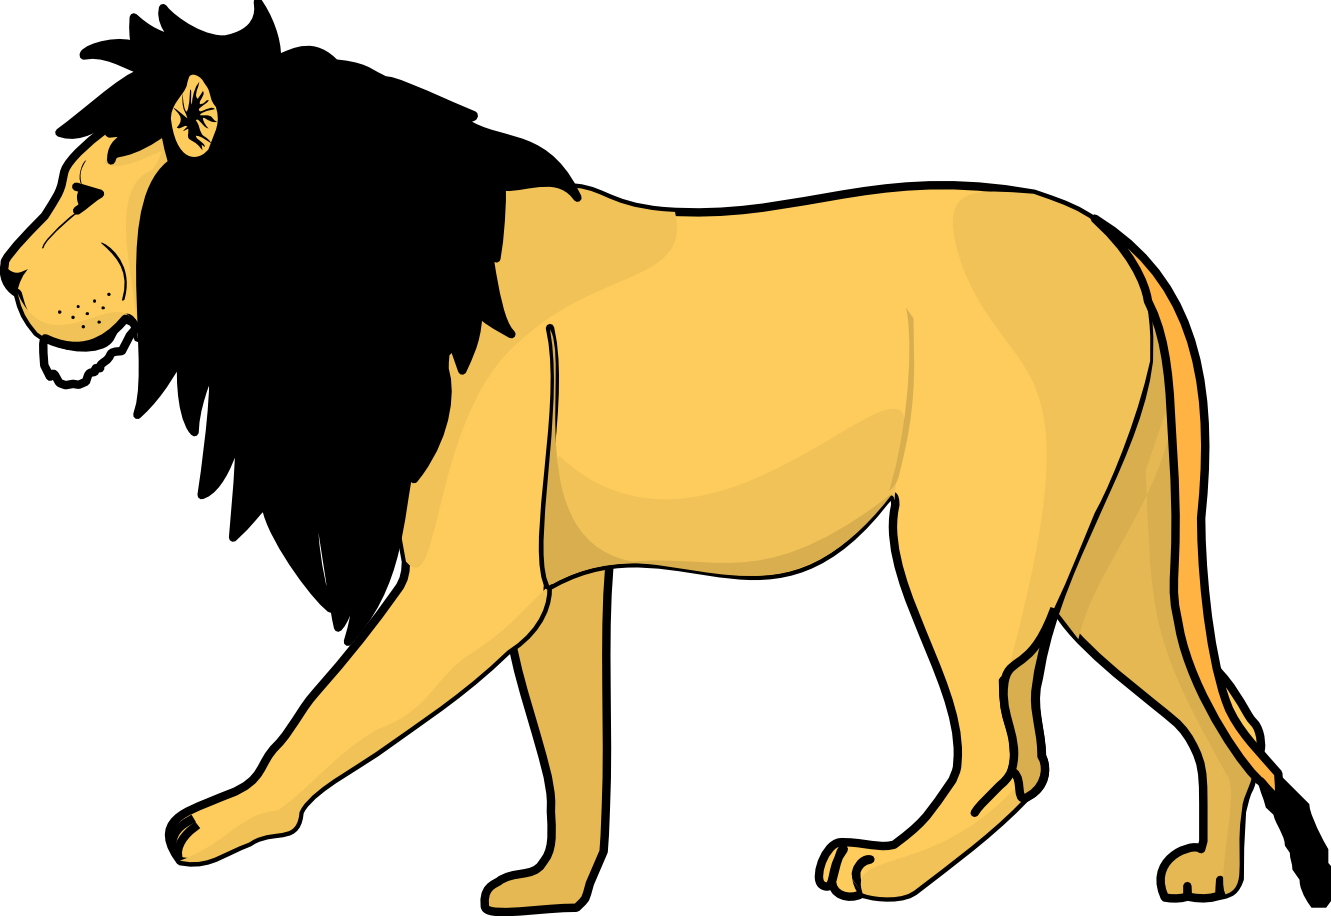 Lion PNG images, free download, lions